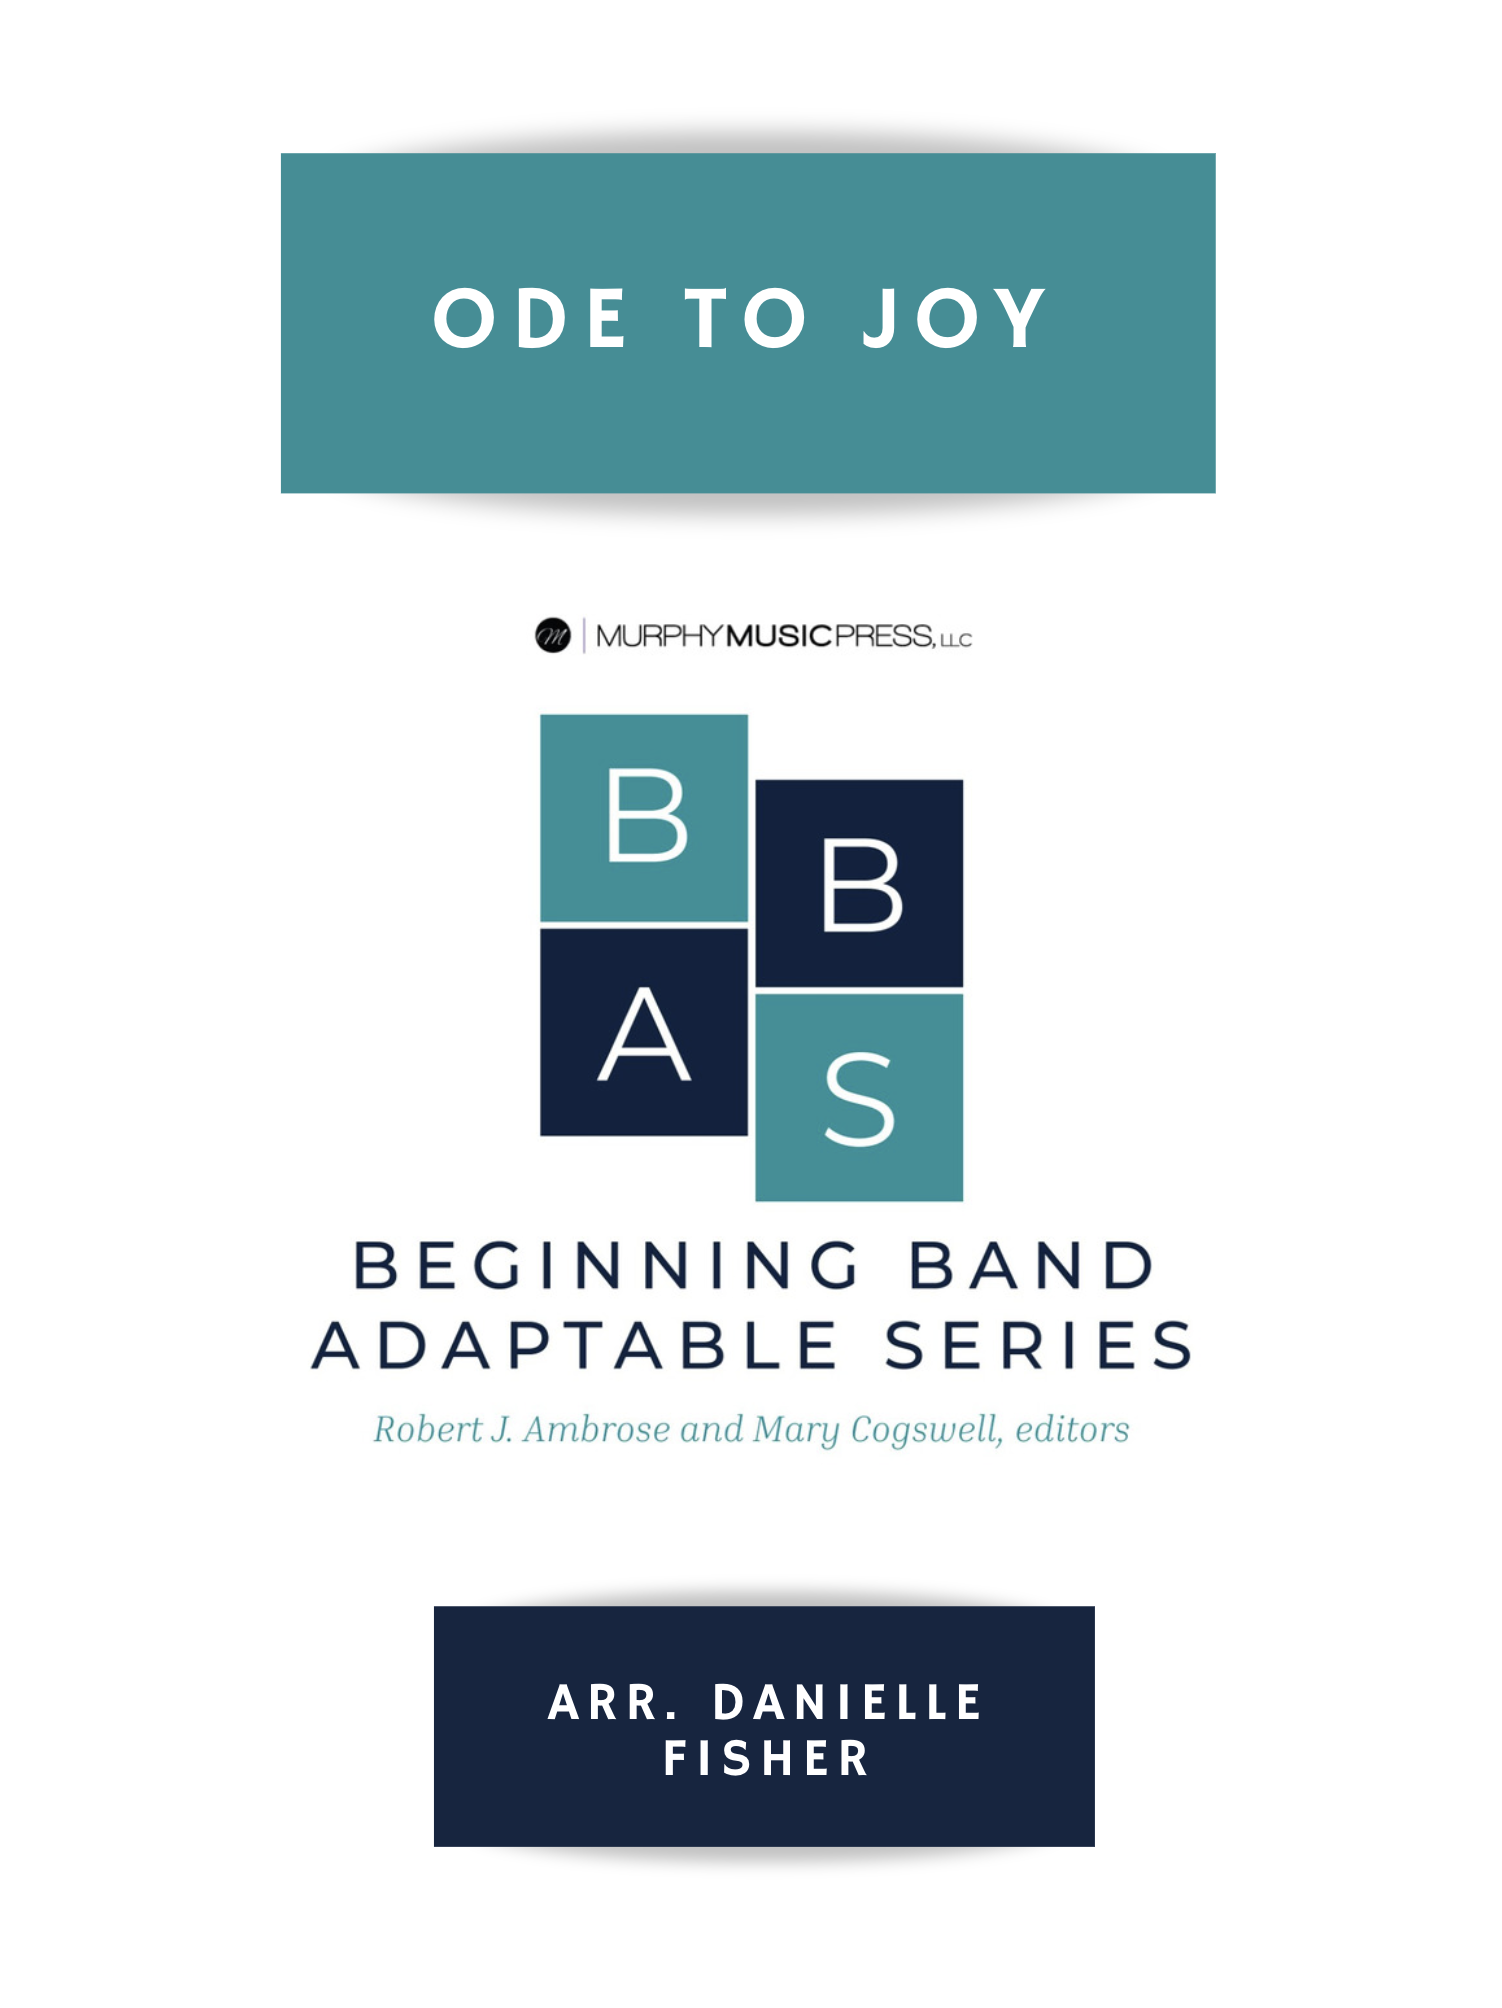 Ode To Joy by arr. Danielle Fisher